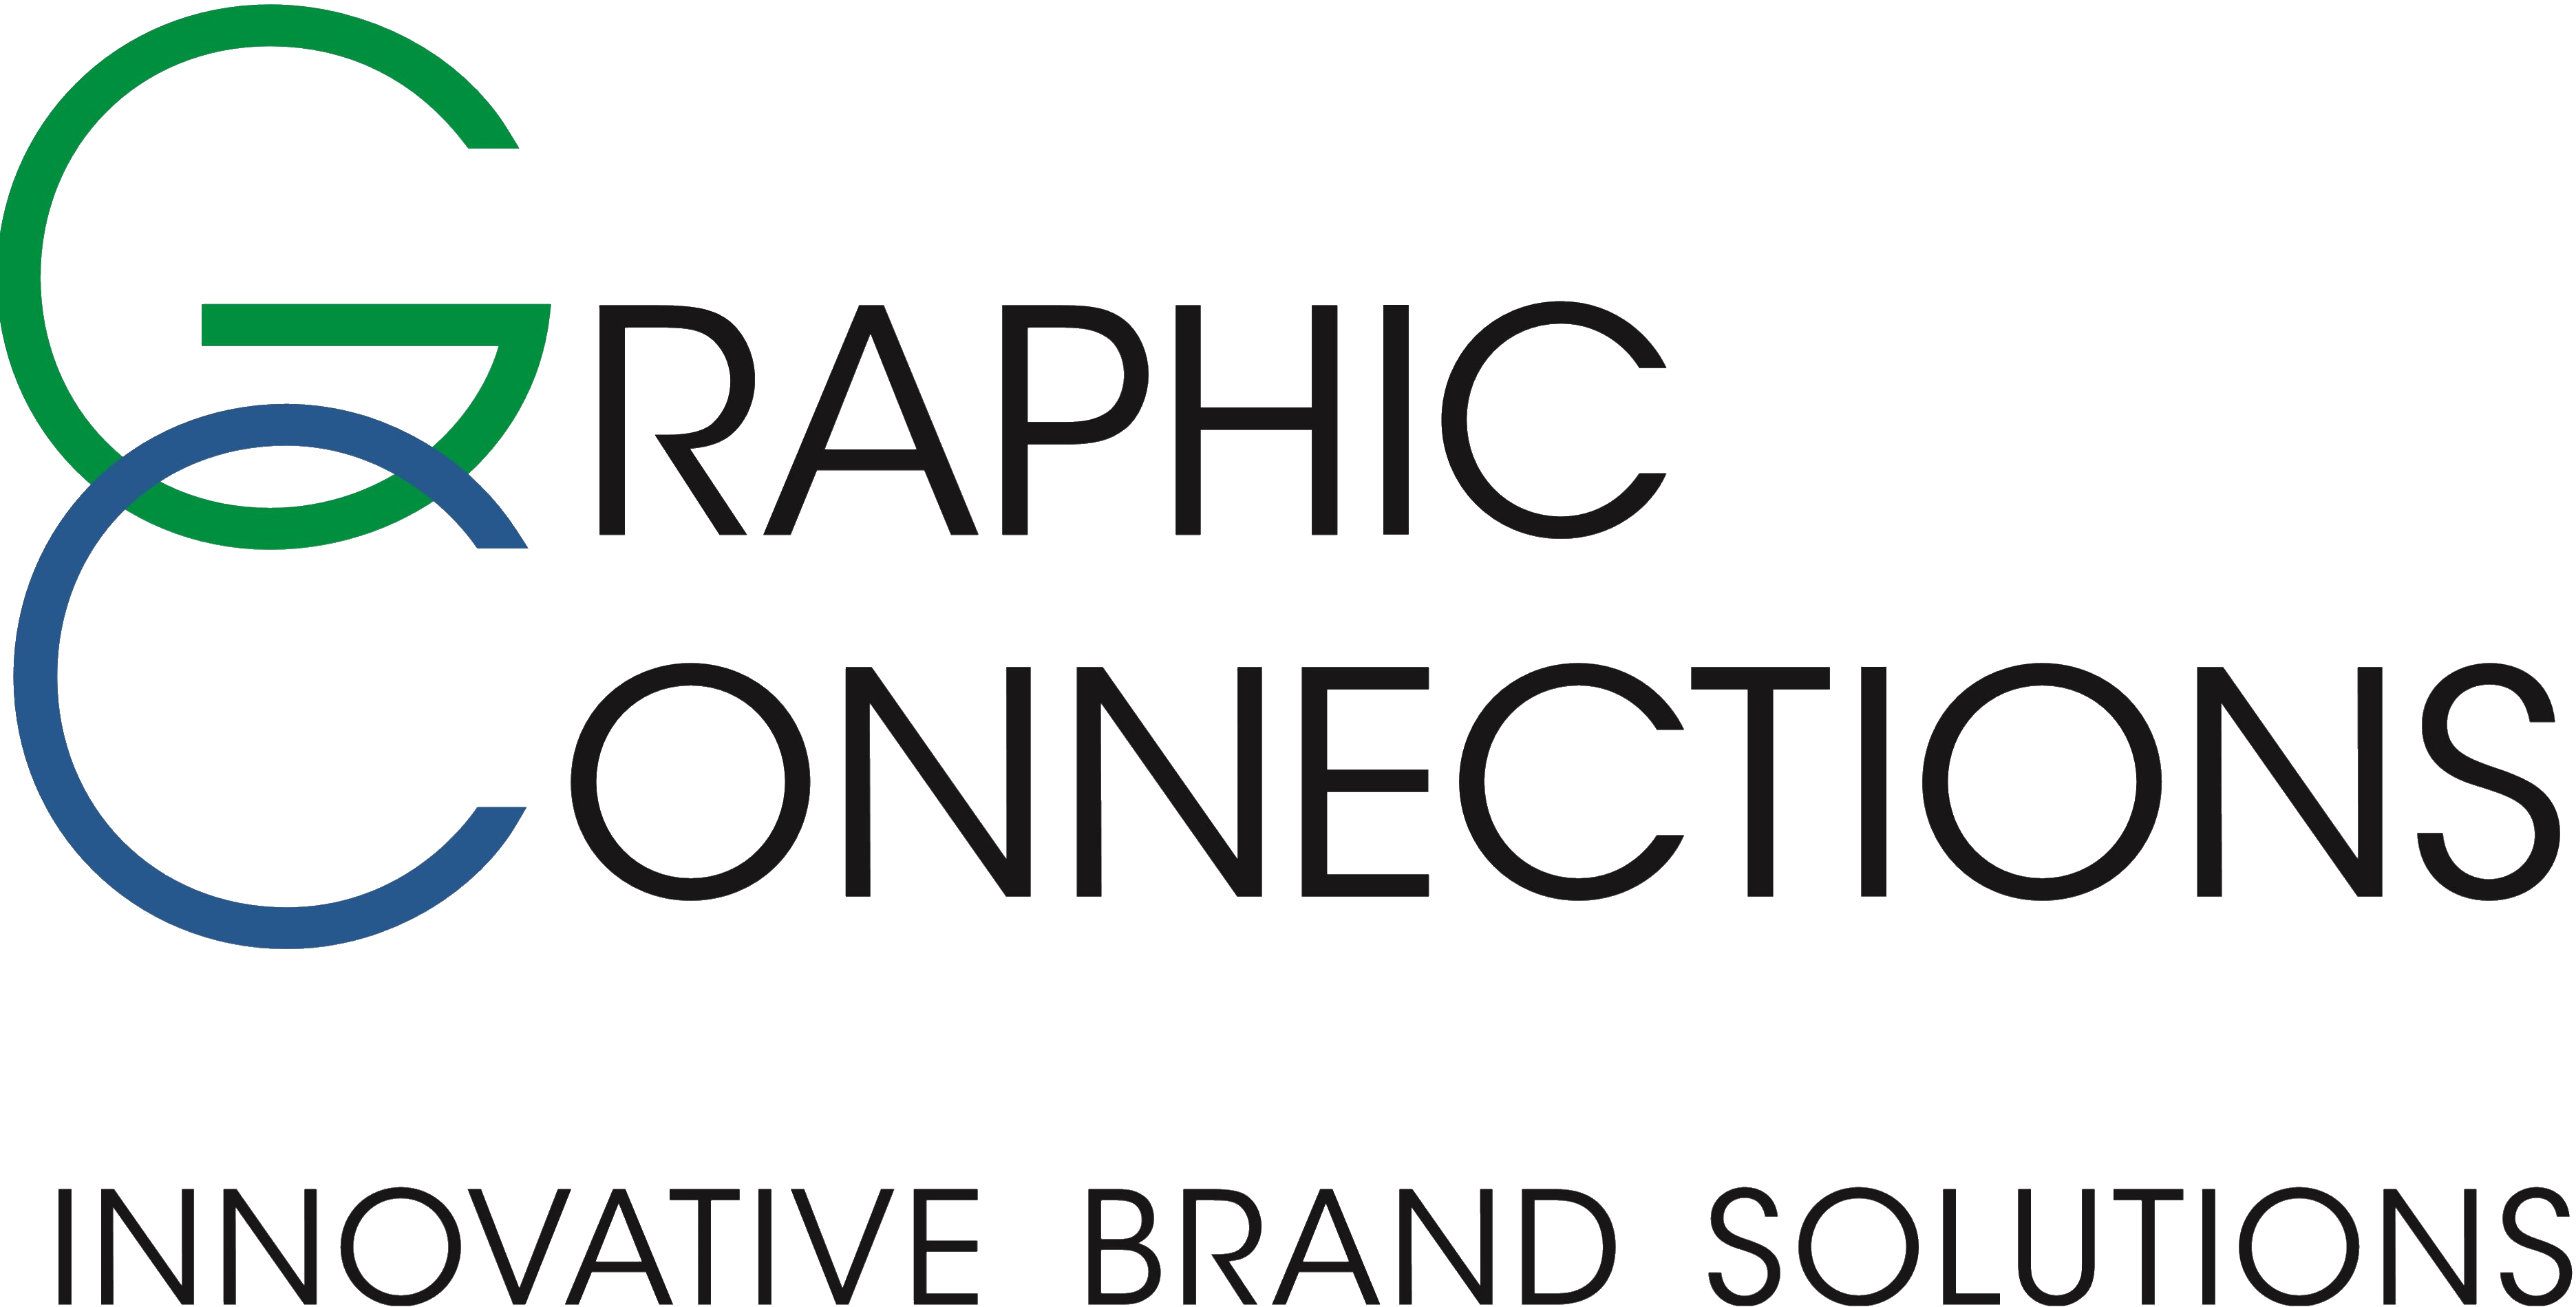 Graphic Connections Logo